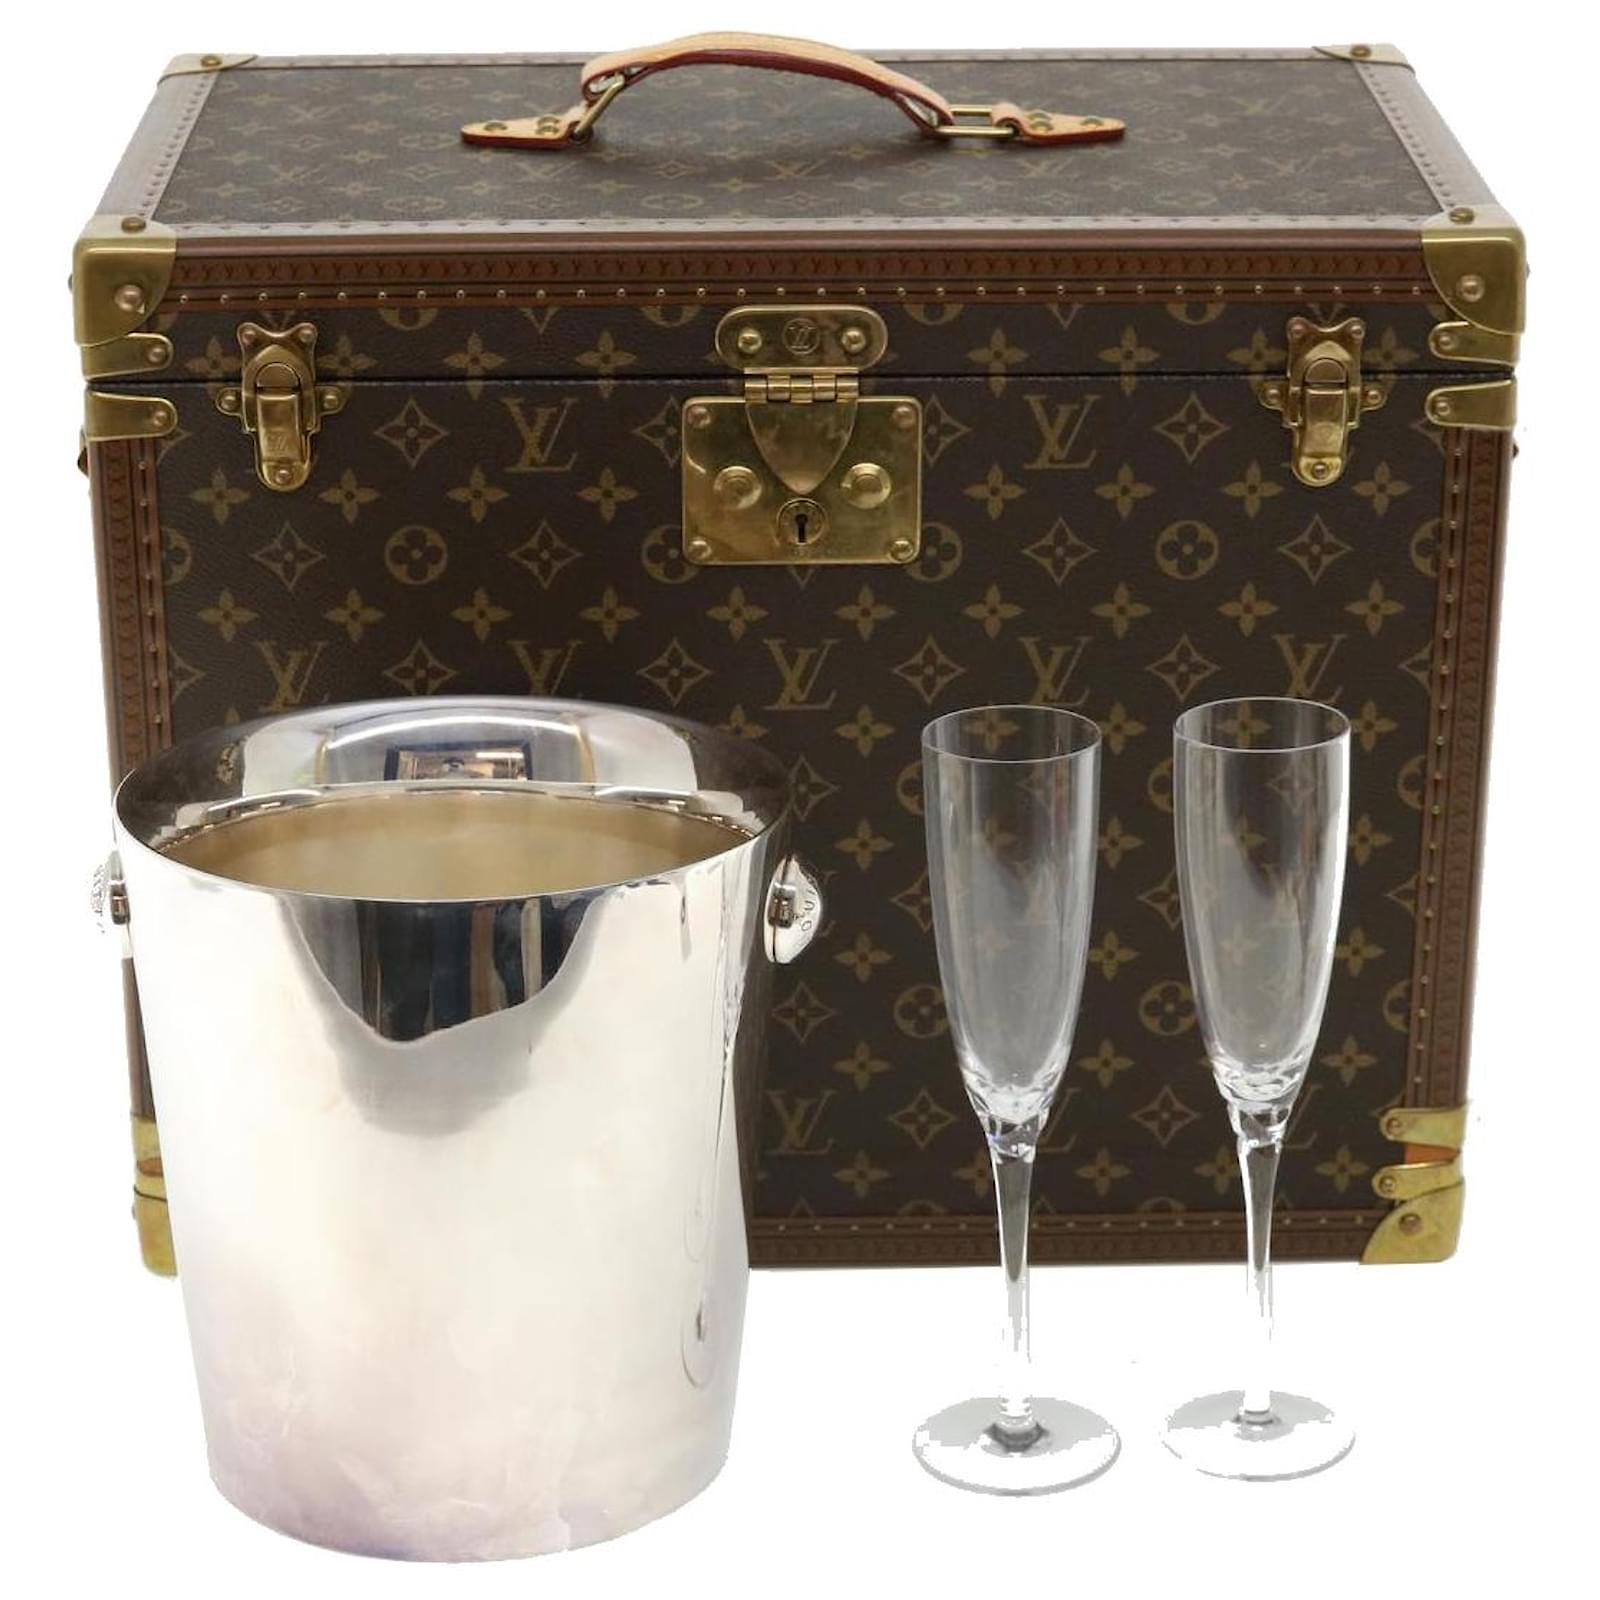 This Louis Vuitton Wine Case Is $50,000 And I Unironically Want It